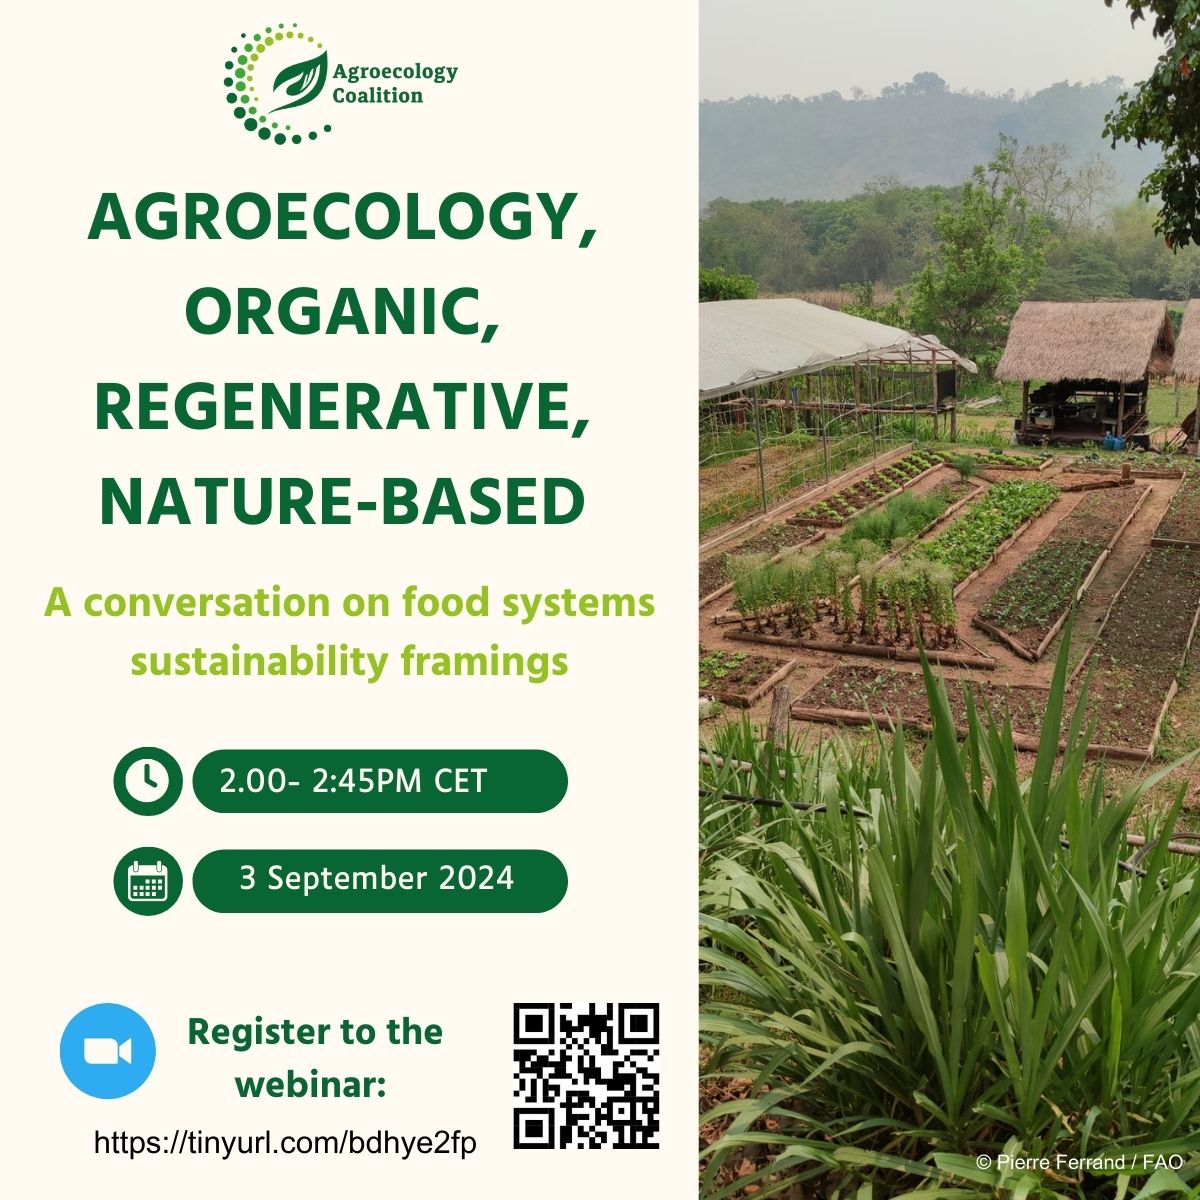 Flyer for a 3 September 2024 online event "Agroecology, Organic, Regenerative, Nature-based" by Agroecology Coalition